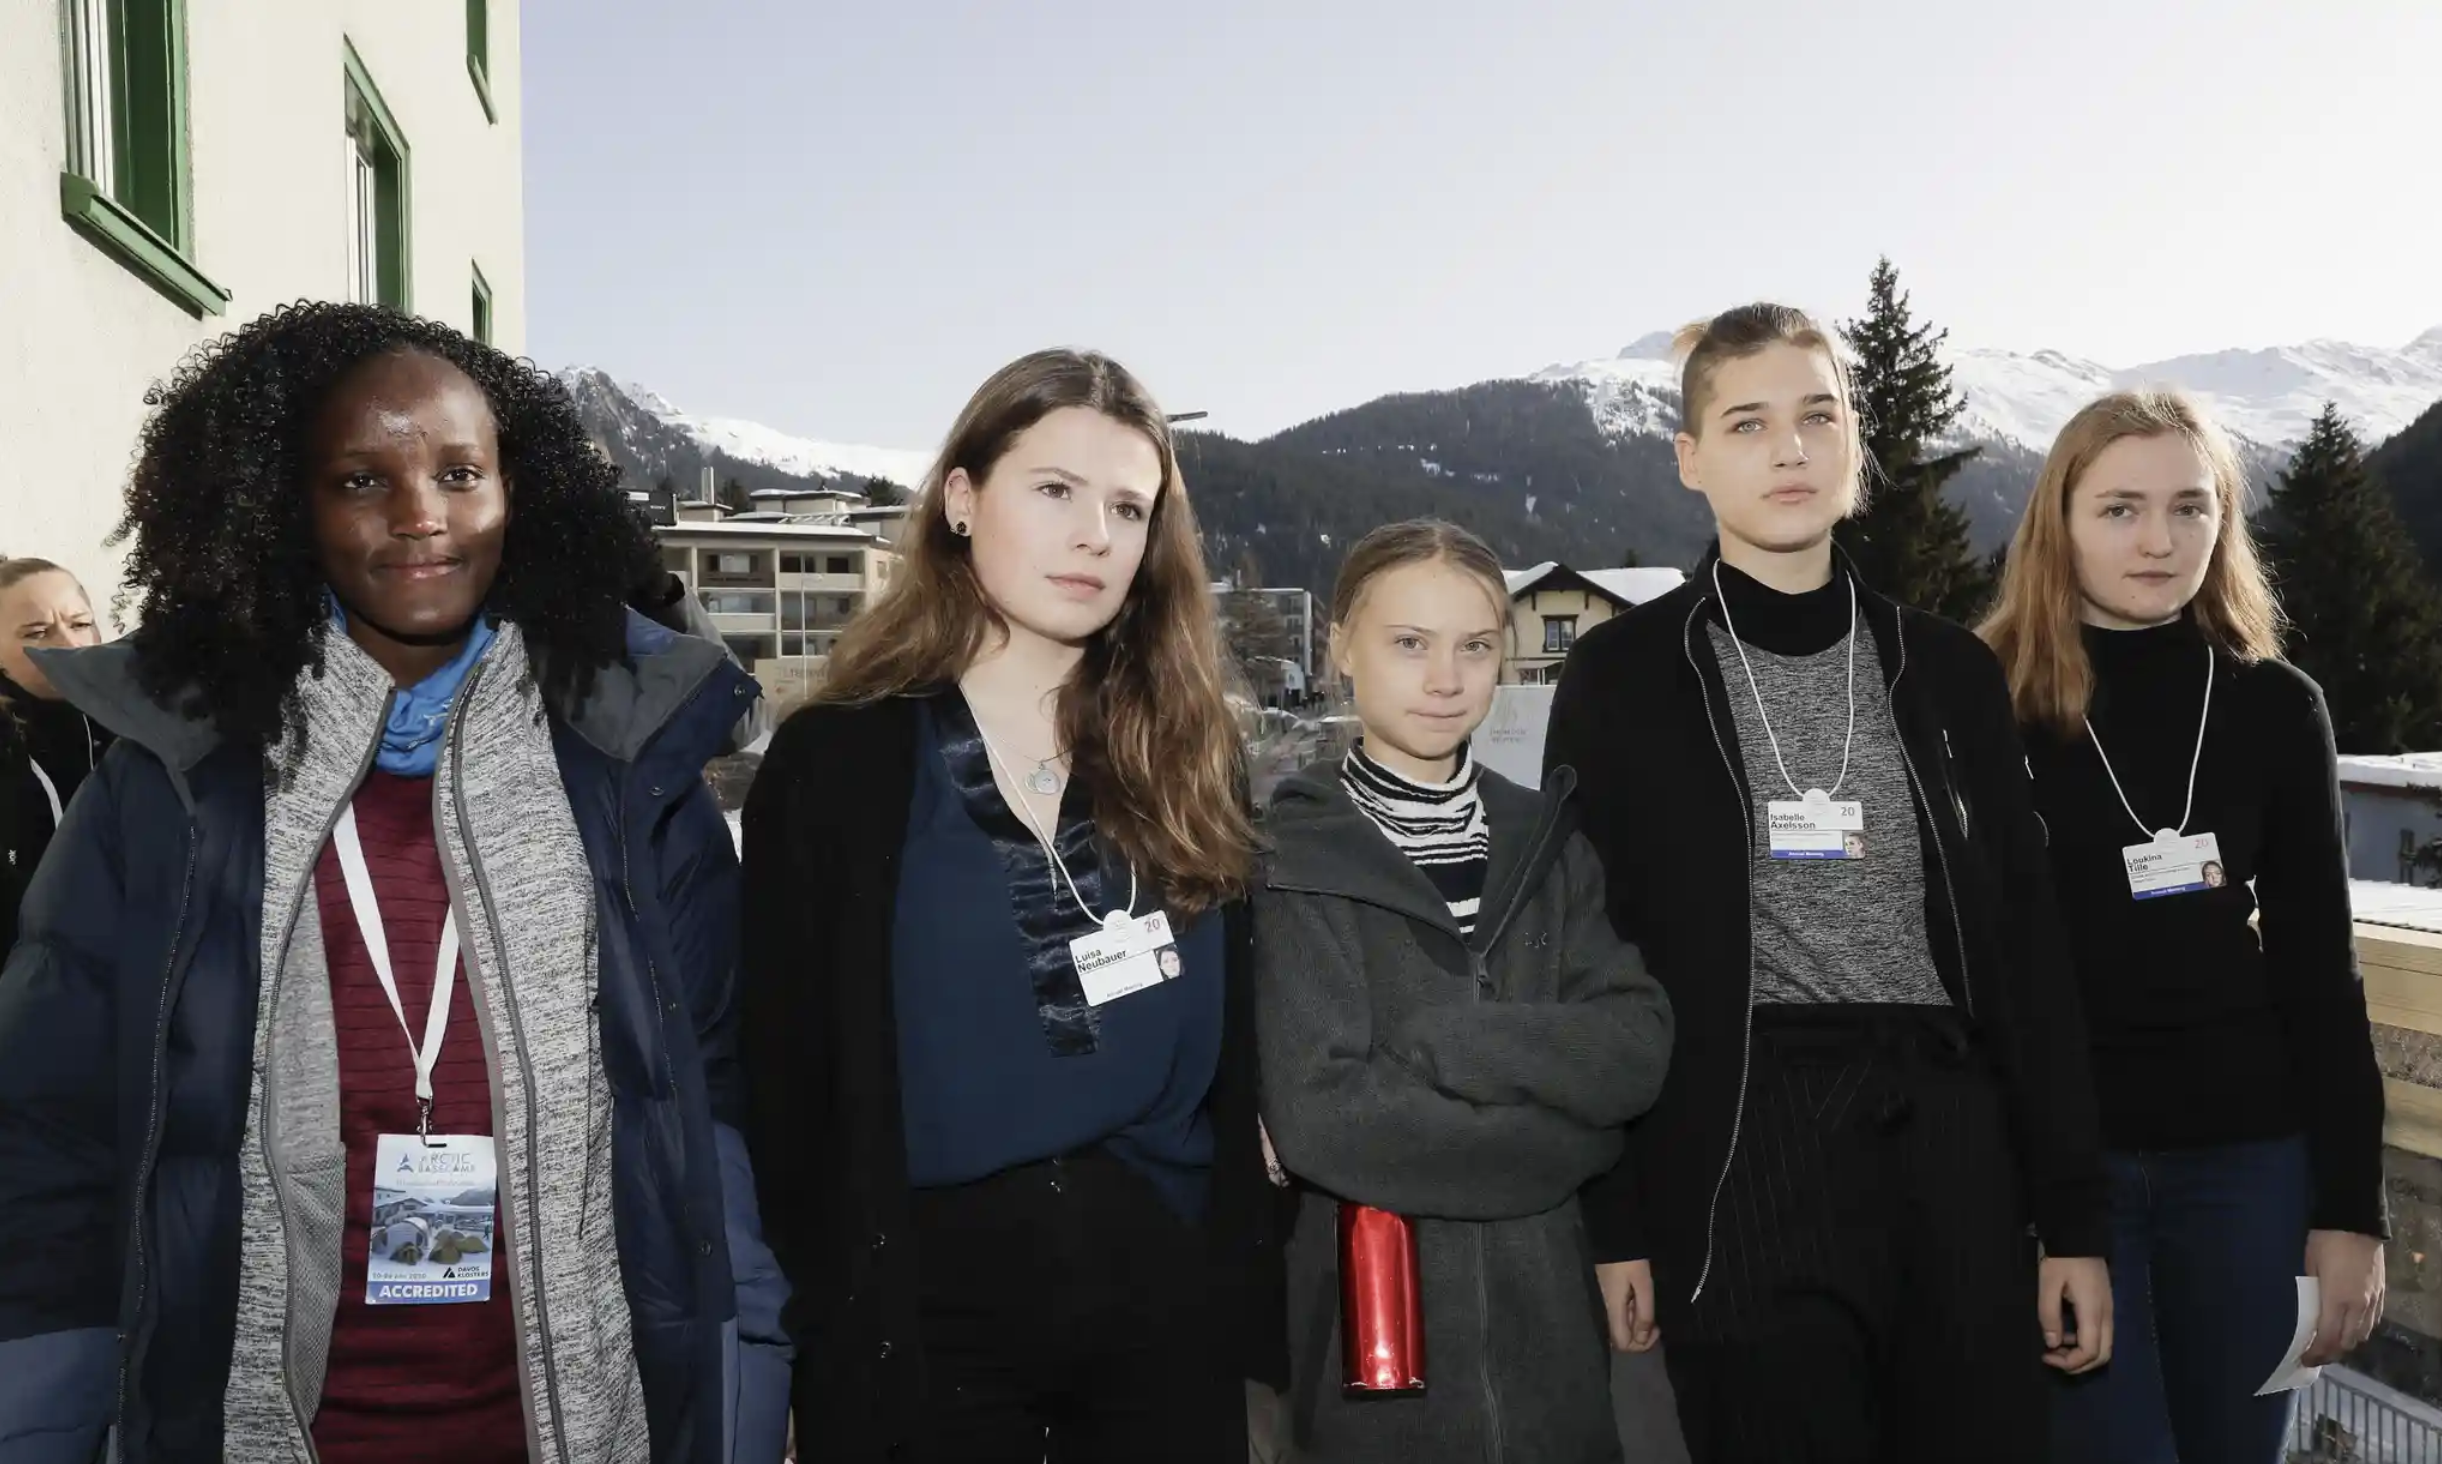 A group of young women stand in a row facing the camera with serious expressions. Four of them are white, and one is Black. They're all wearing smart outdoor clothes and wearing conference lanyards with ID badges.